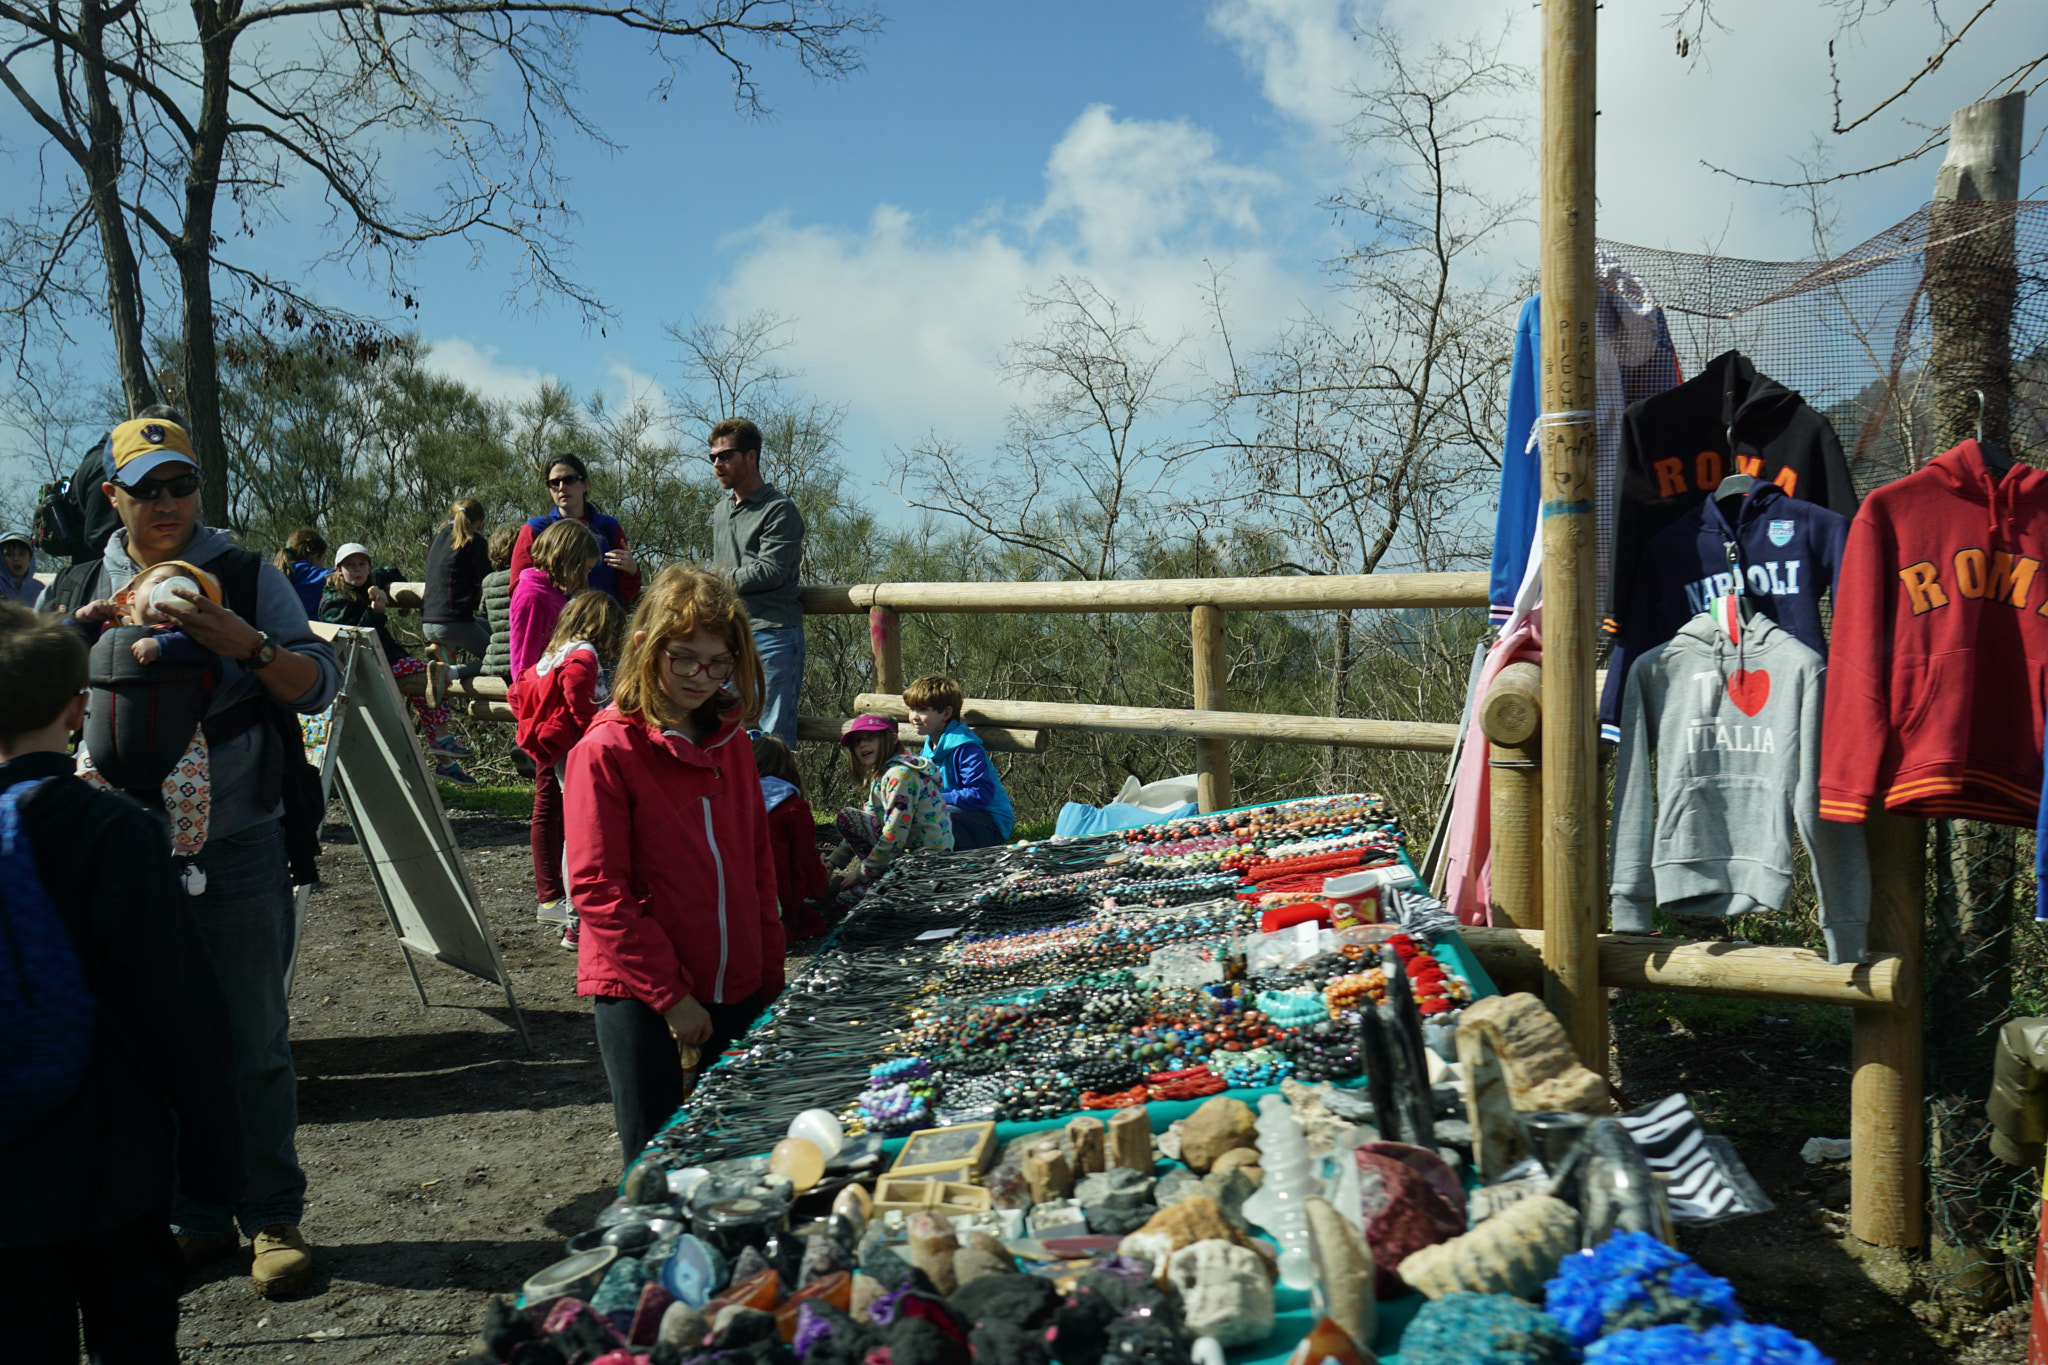 Sony a6000 sample photo. Road side shopping - mount vesuvius photography